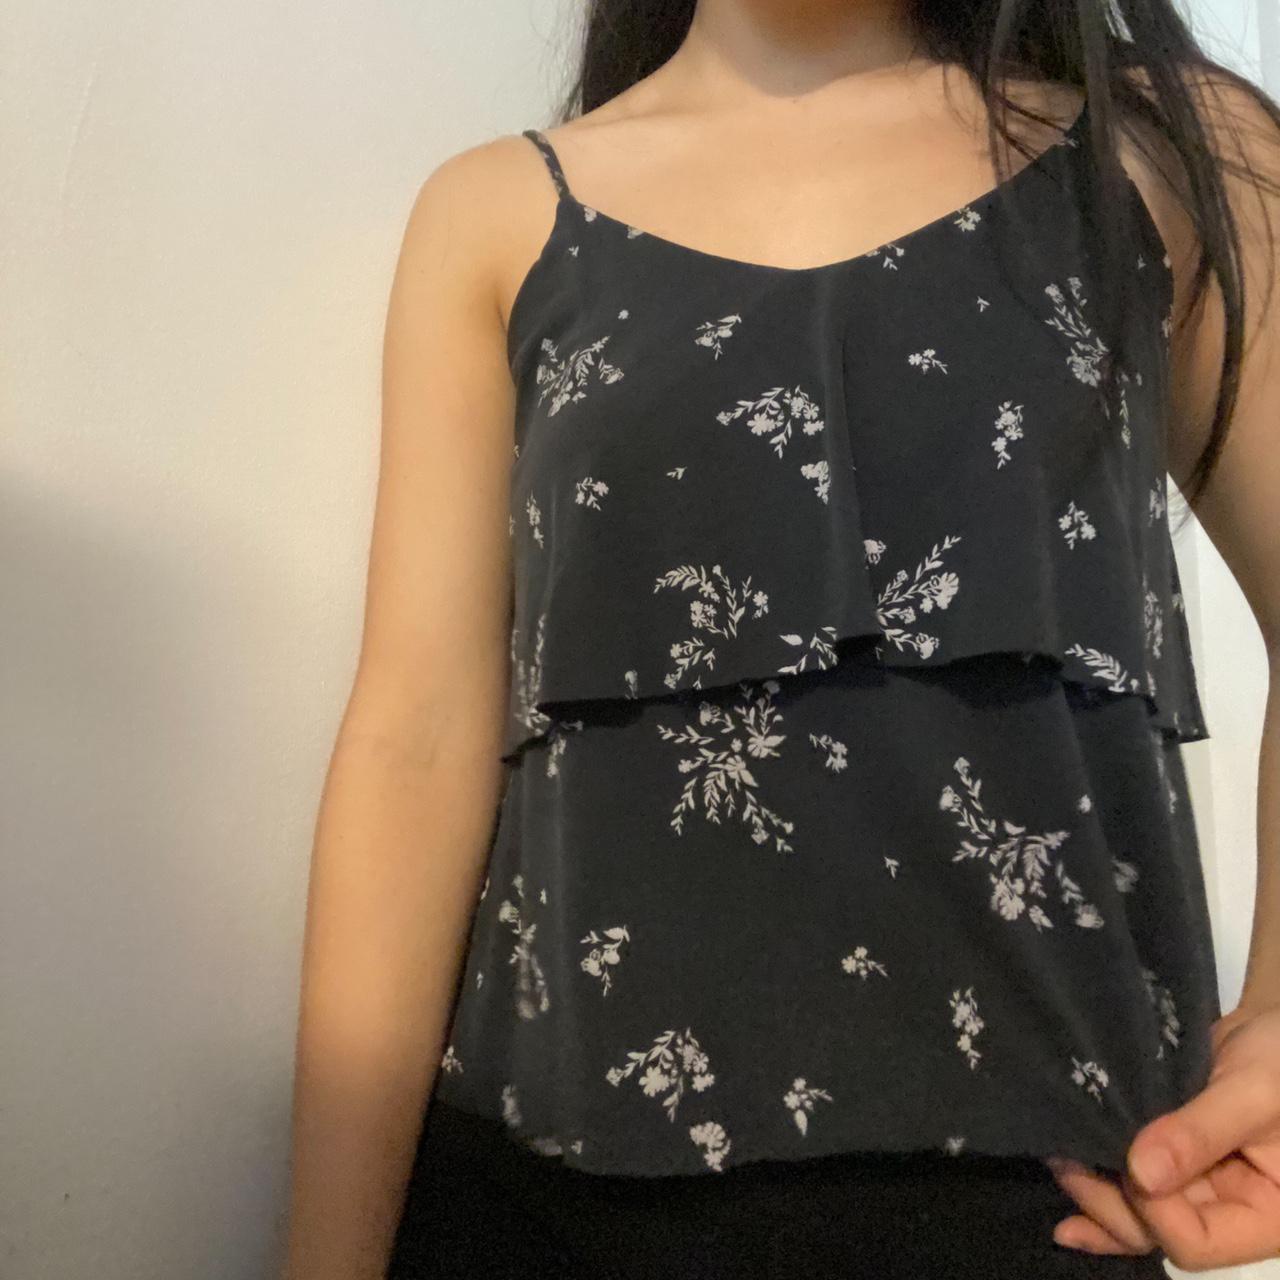 Product Image 2 - Black floral cami top
Has two